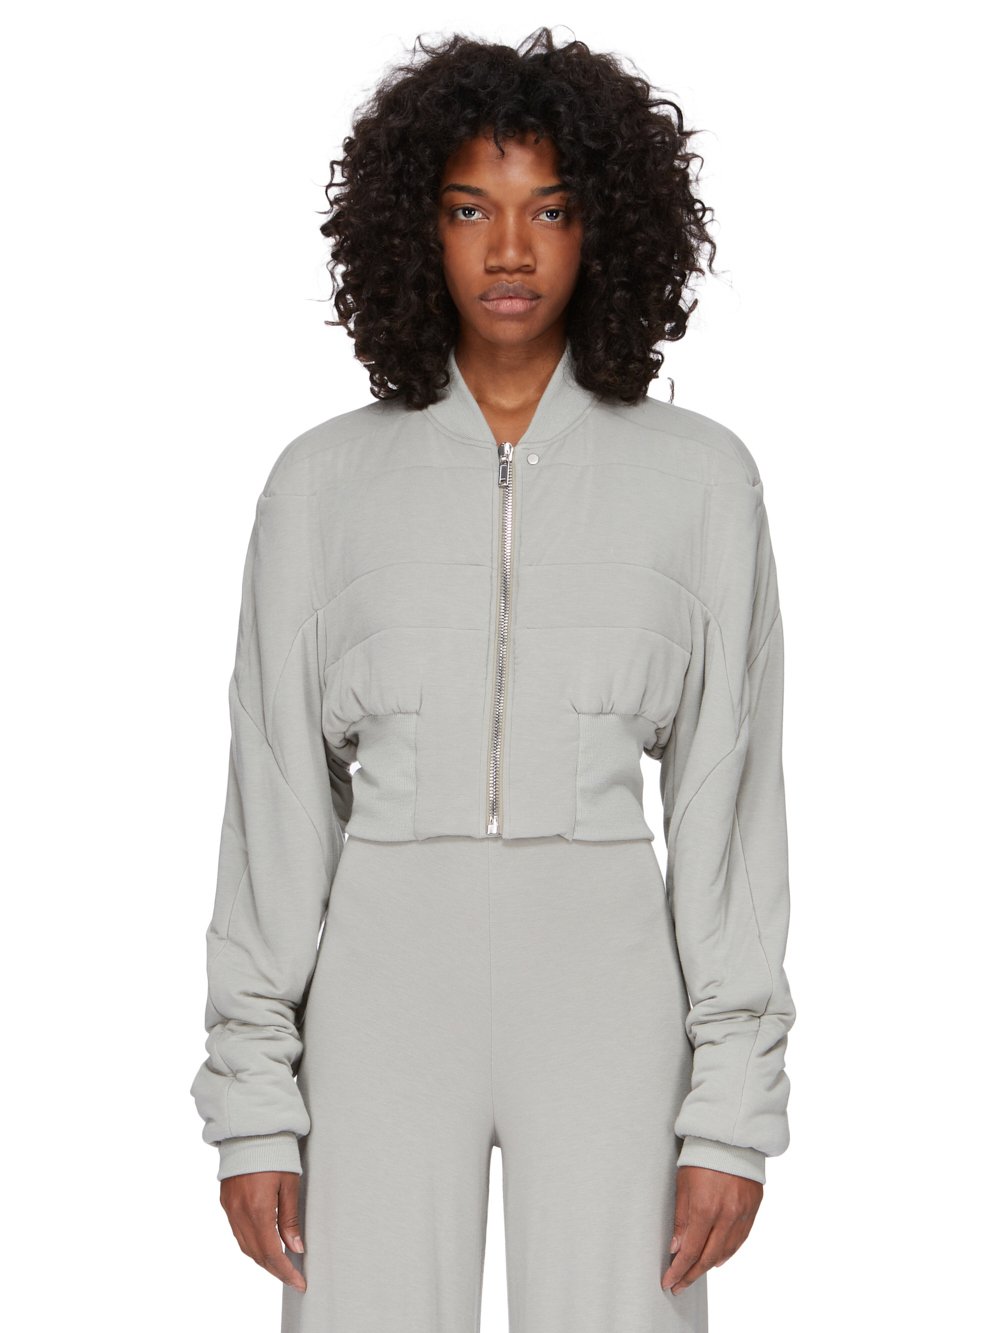 RICK OWENS LILIES FW23 LUXOR COLLAGE BOMBER IN PEARL MODAL CASHMERE JERSEY